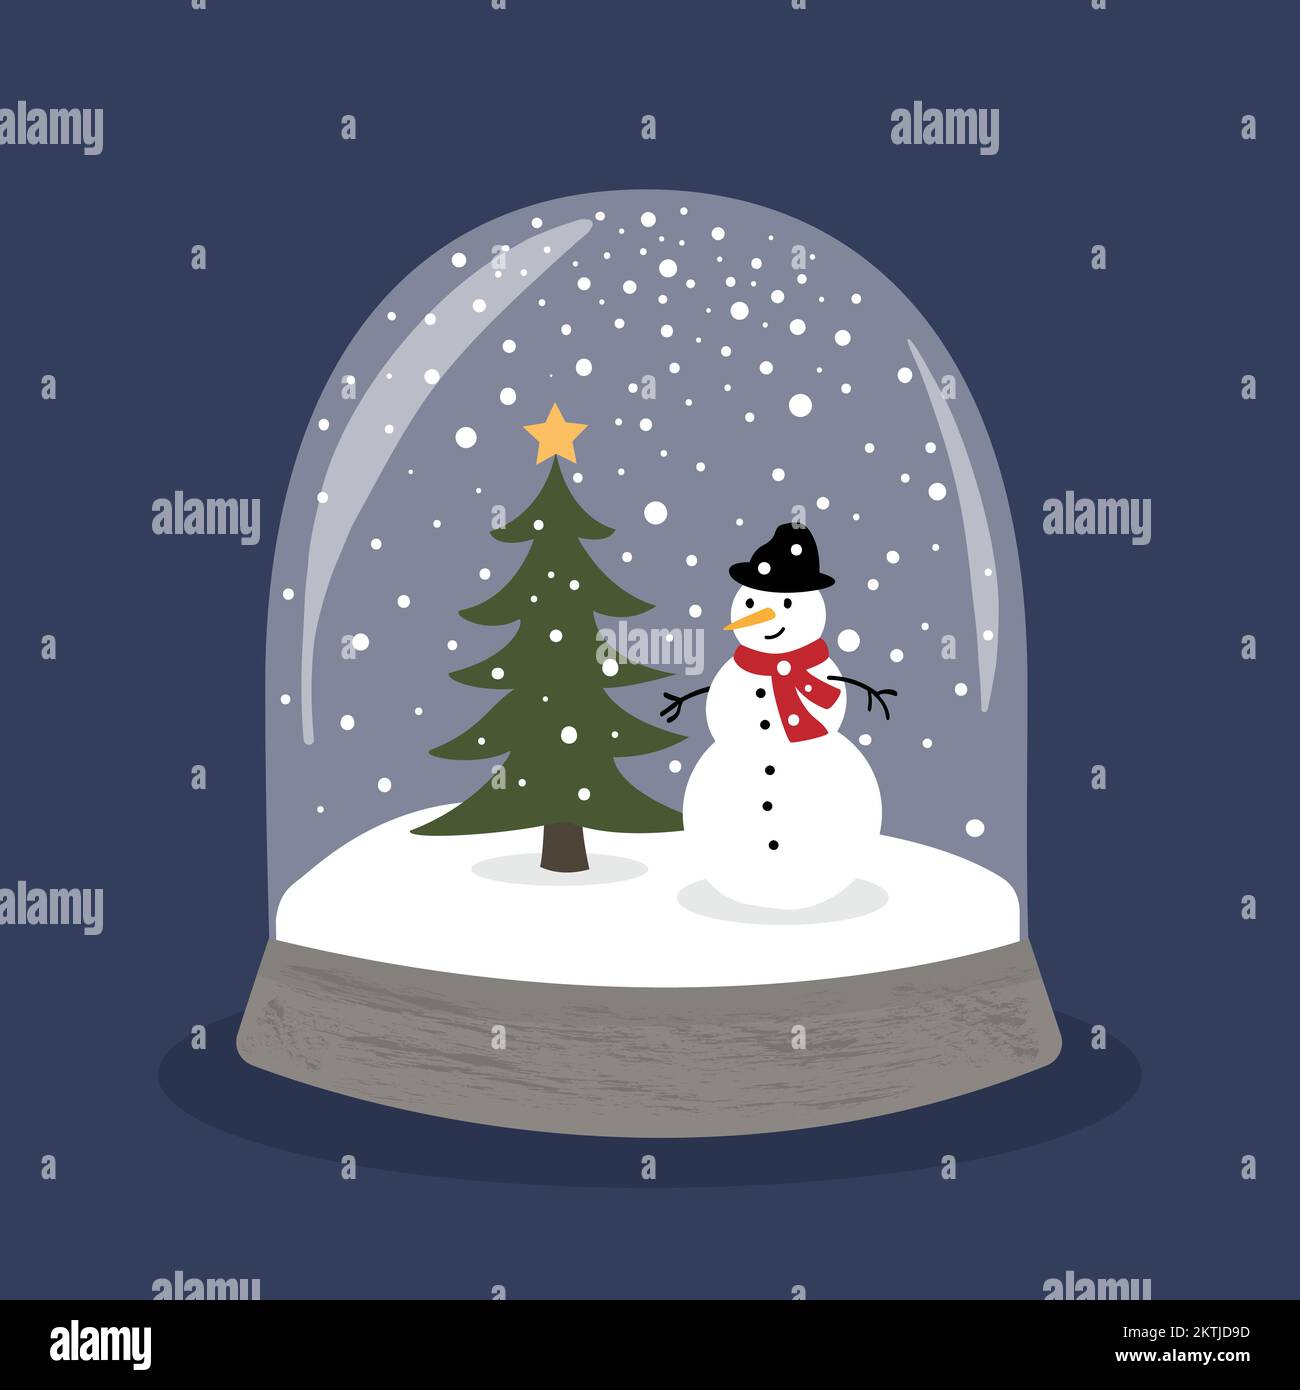 Snow globe with Christmas tree and snowman. Stock Vector